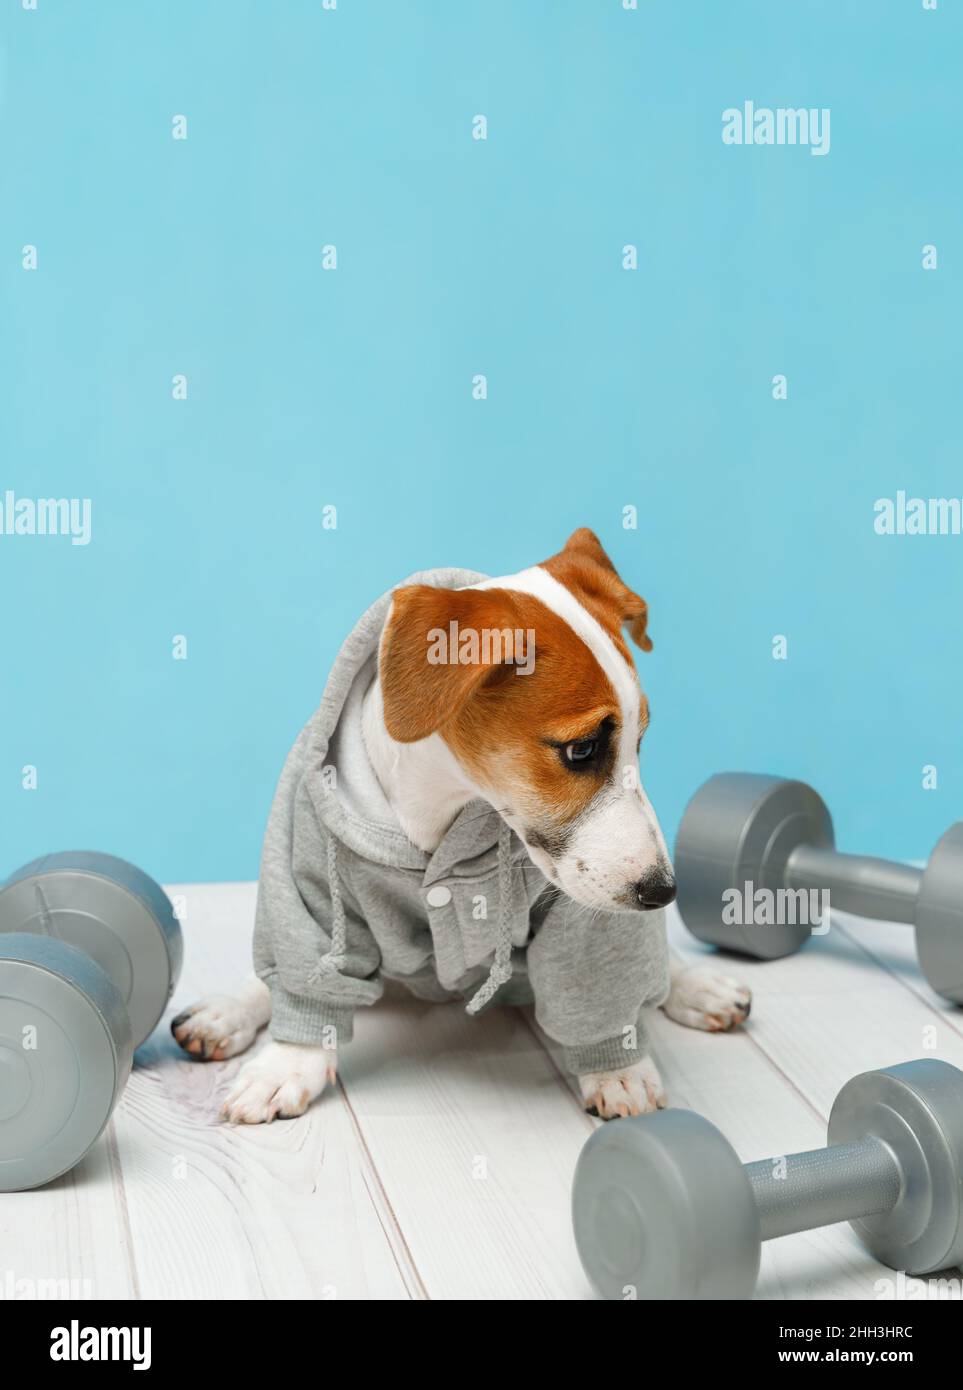 Sad puppy with sports equipment. Sport, fitness, bodybuilding concept. Stock Photo